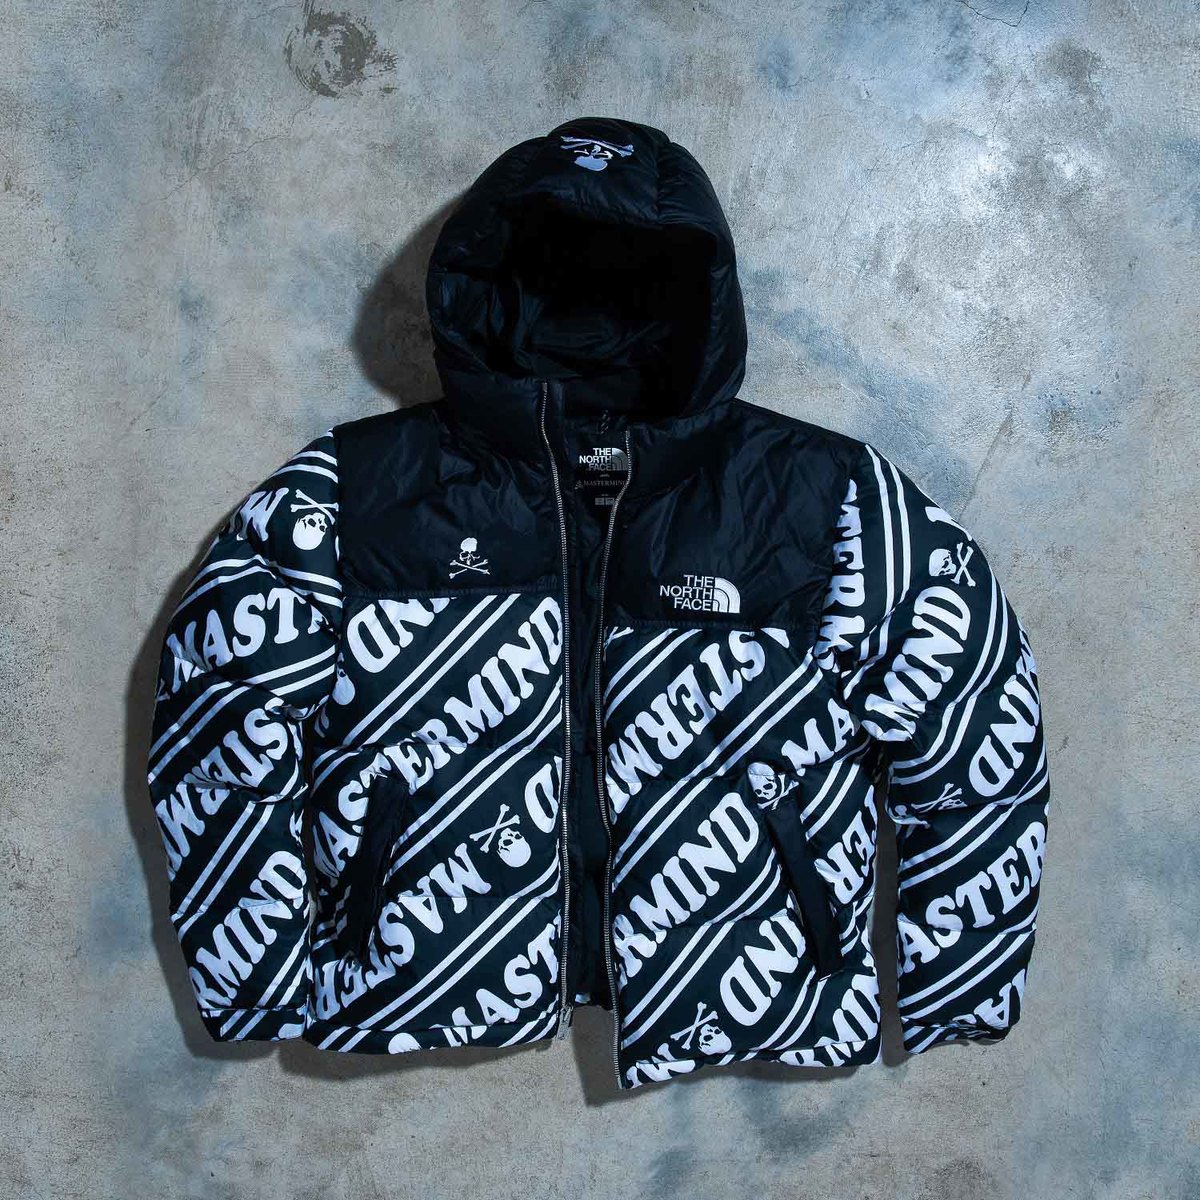 The North Face Join Mastermind In Second Collaboration